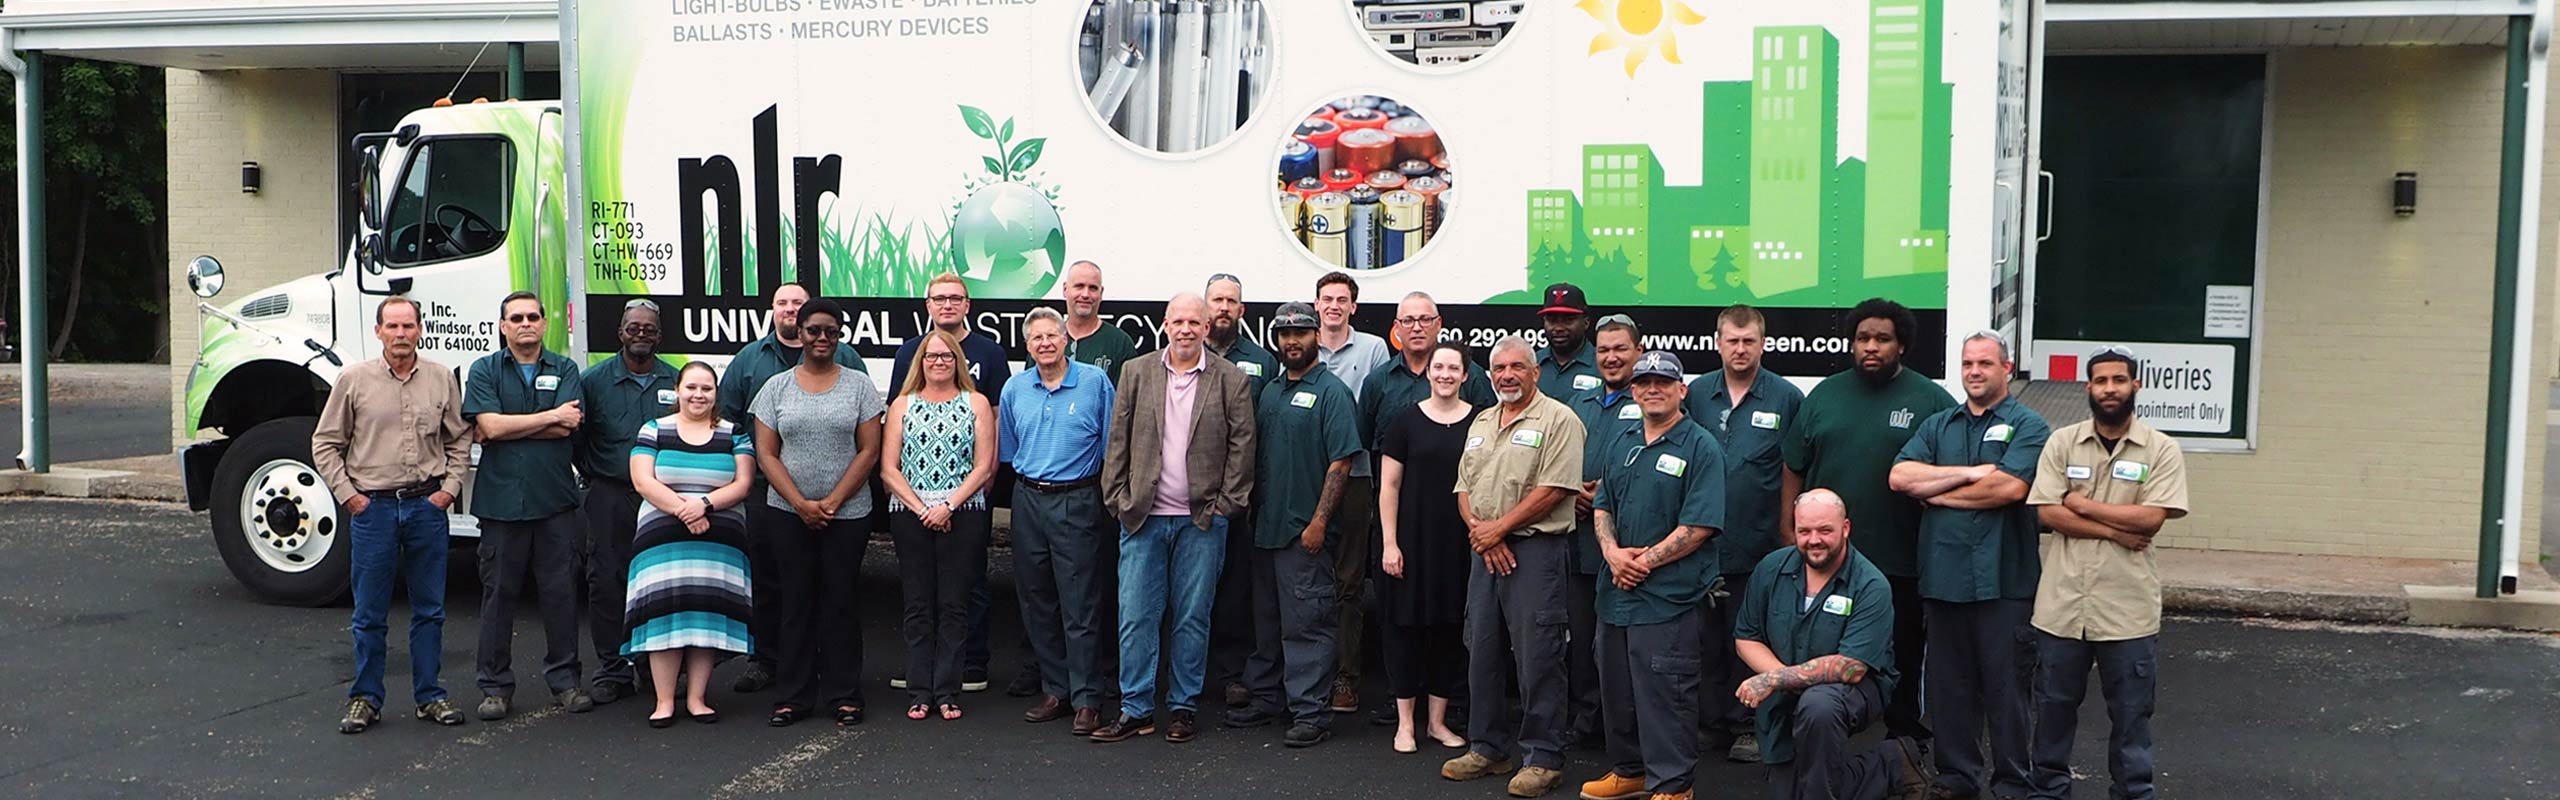 A picture of the nlr staff including the office staff, UWH workers, and lamp processing team. NLR works tirelessly to make sure recycling your universal waste is a painless process.